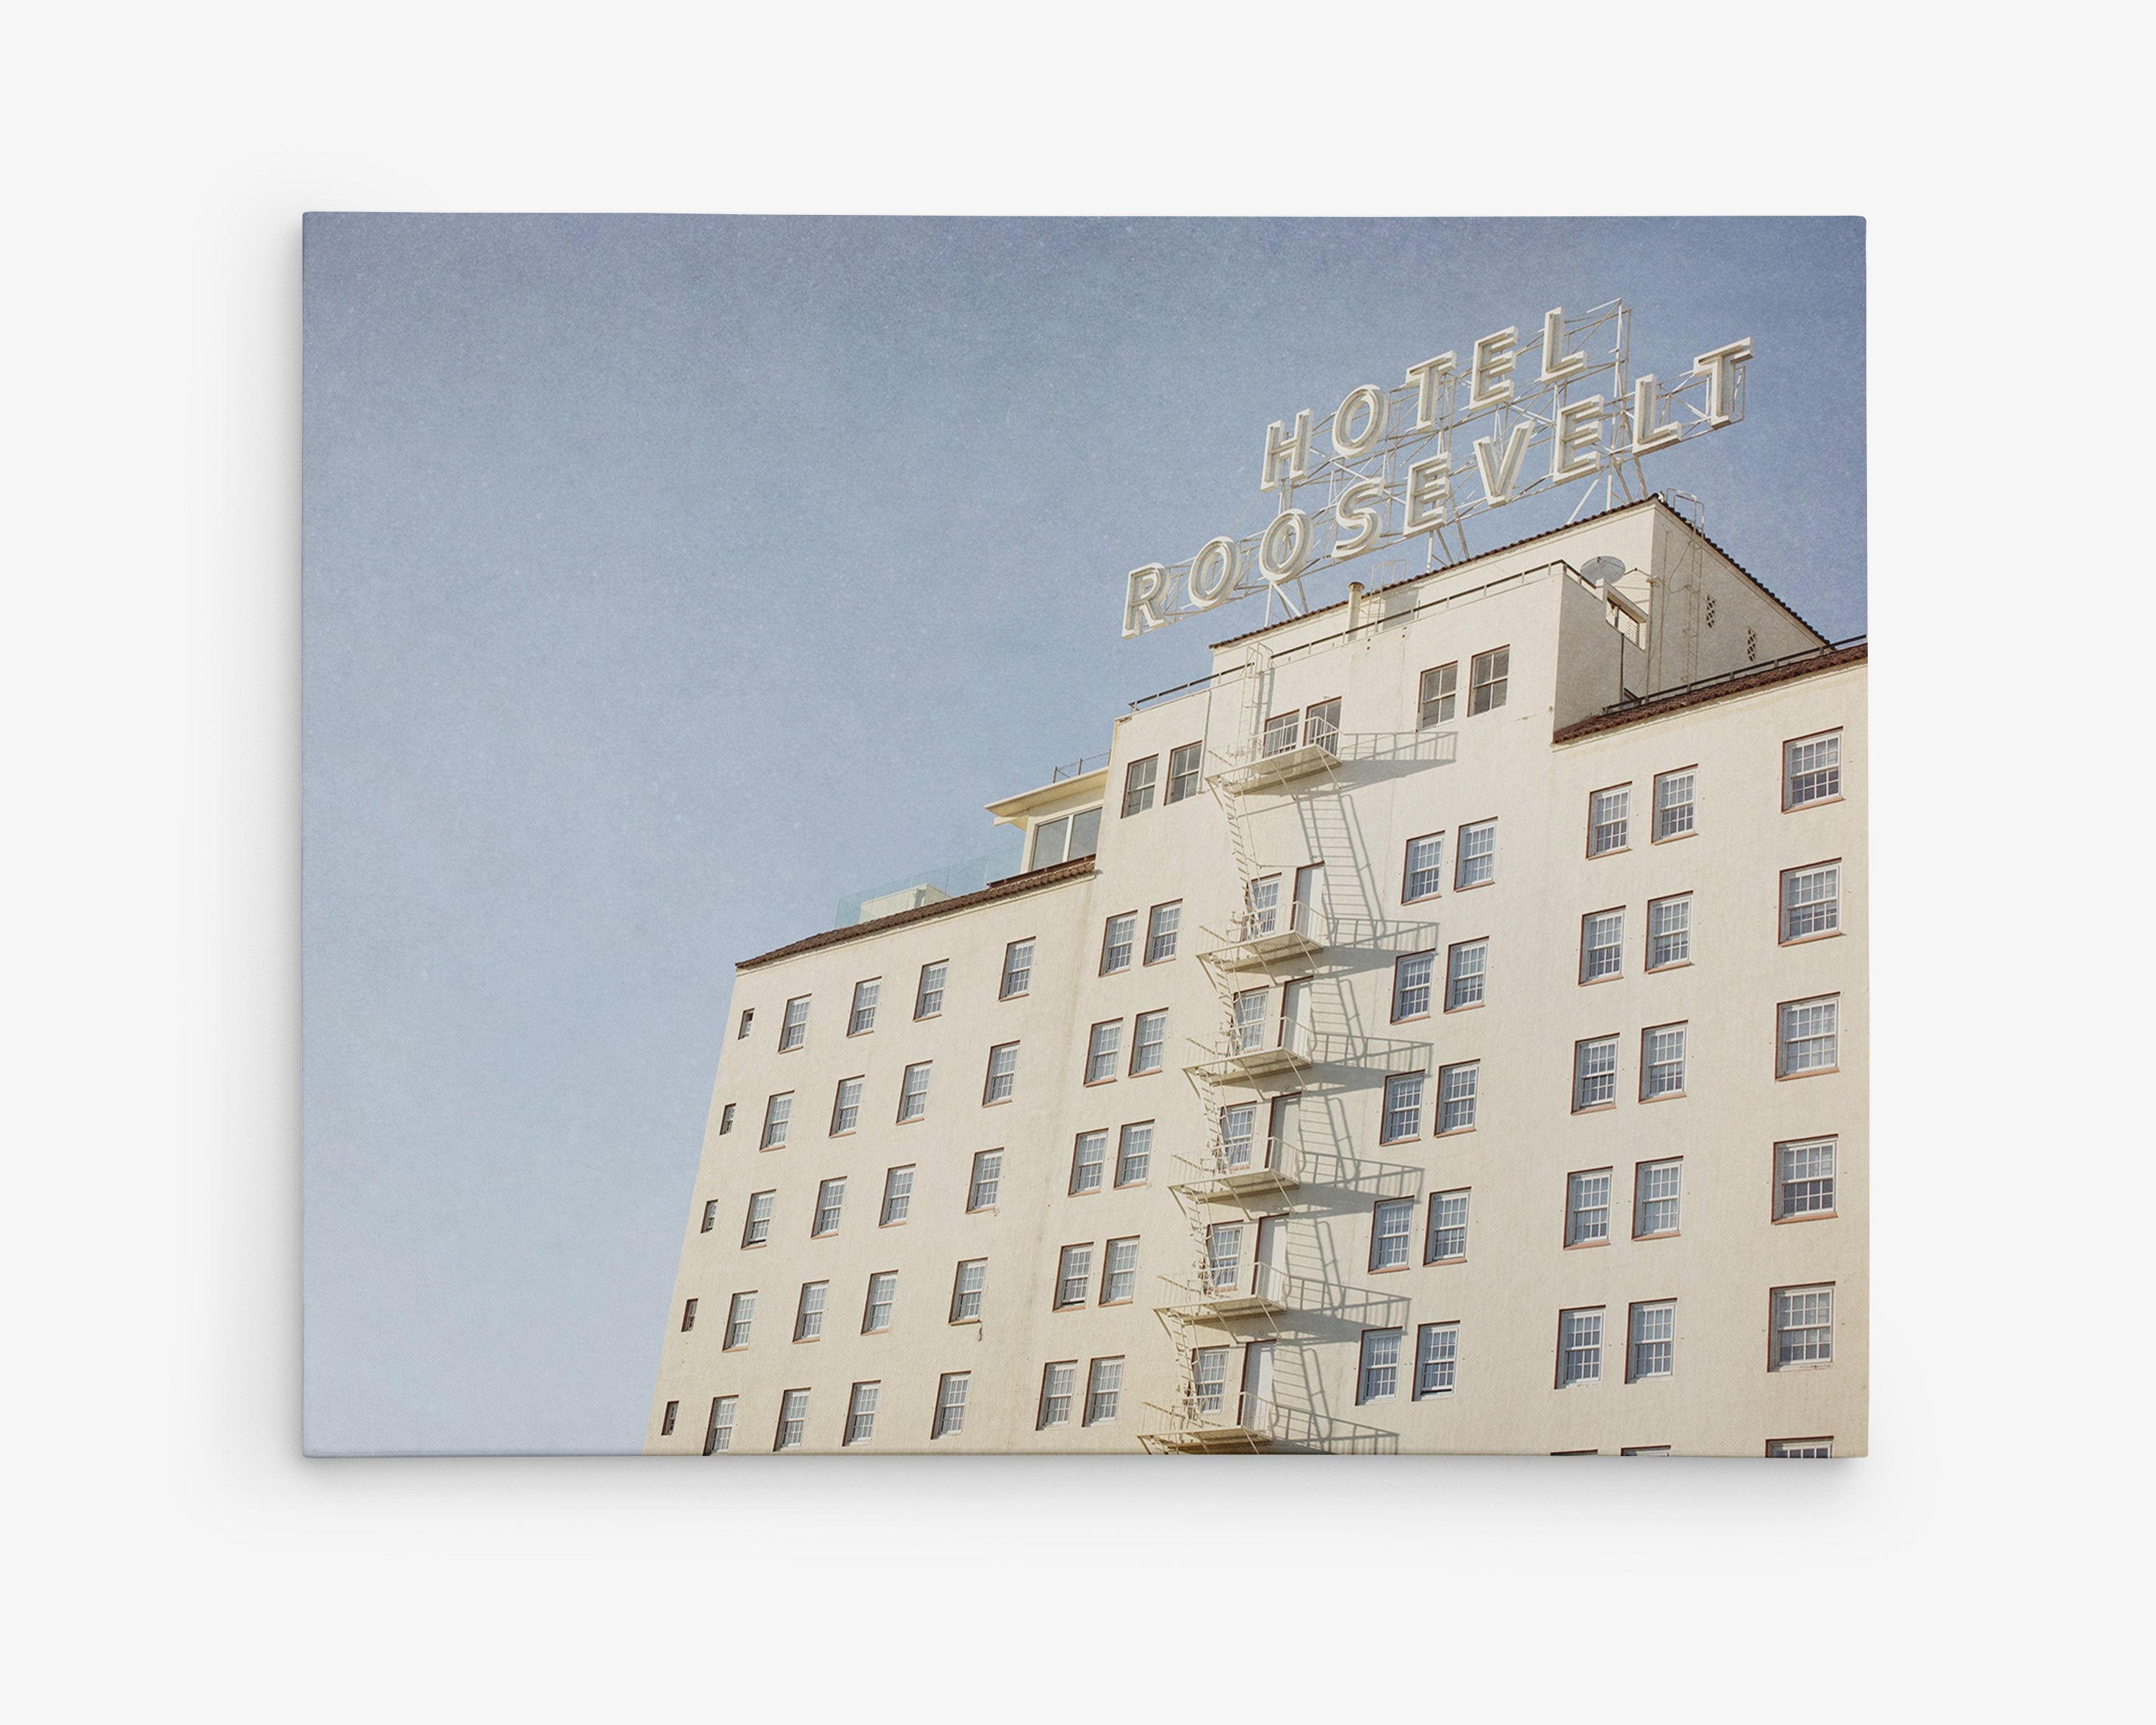 A photograph of the Offley Green Retro Hollywood Canvas Wall Art, 'Night in Tinseltown' under a clear sky, showing its white facade and a prominent neon sign on top, with an exterior fire escape on the side.